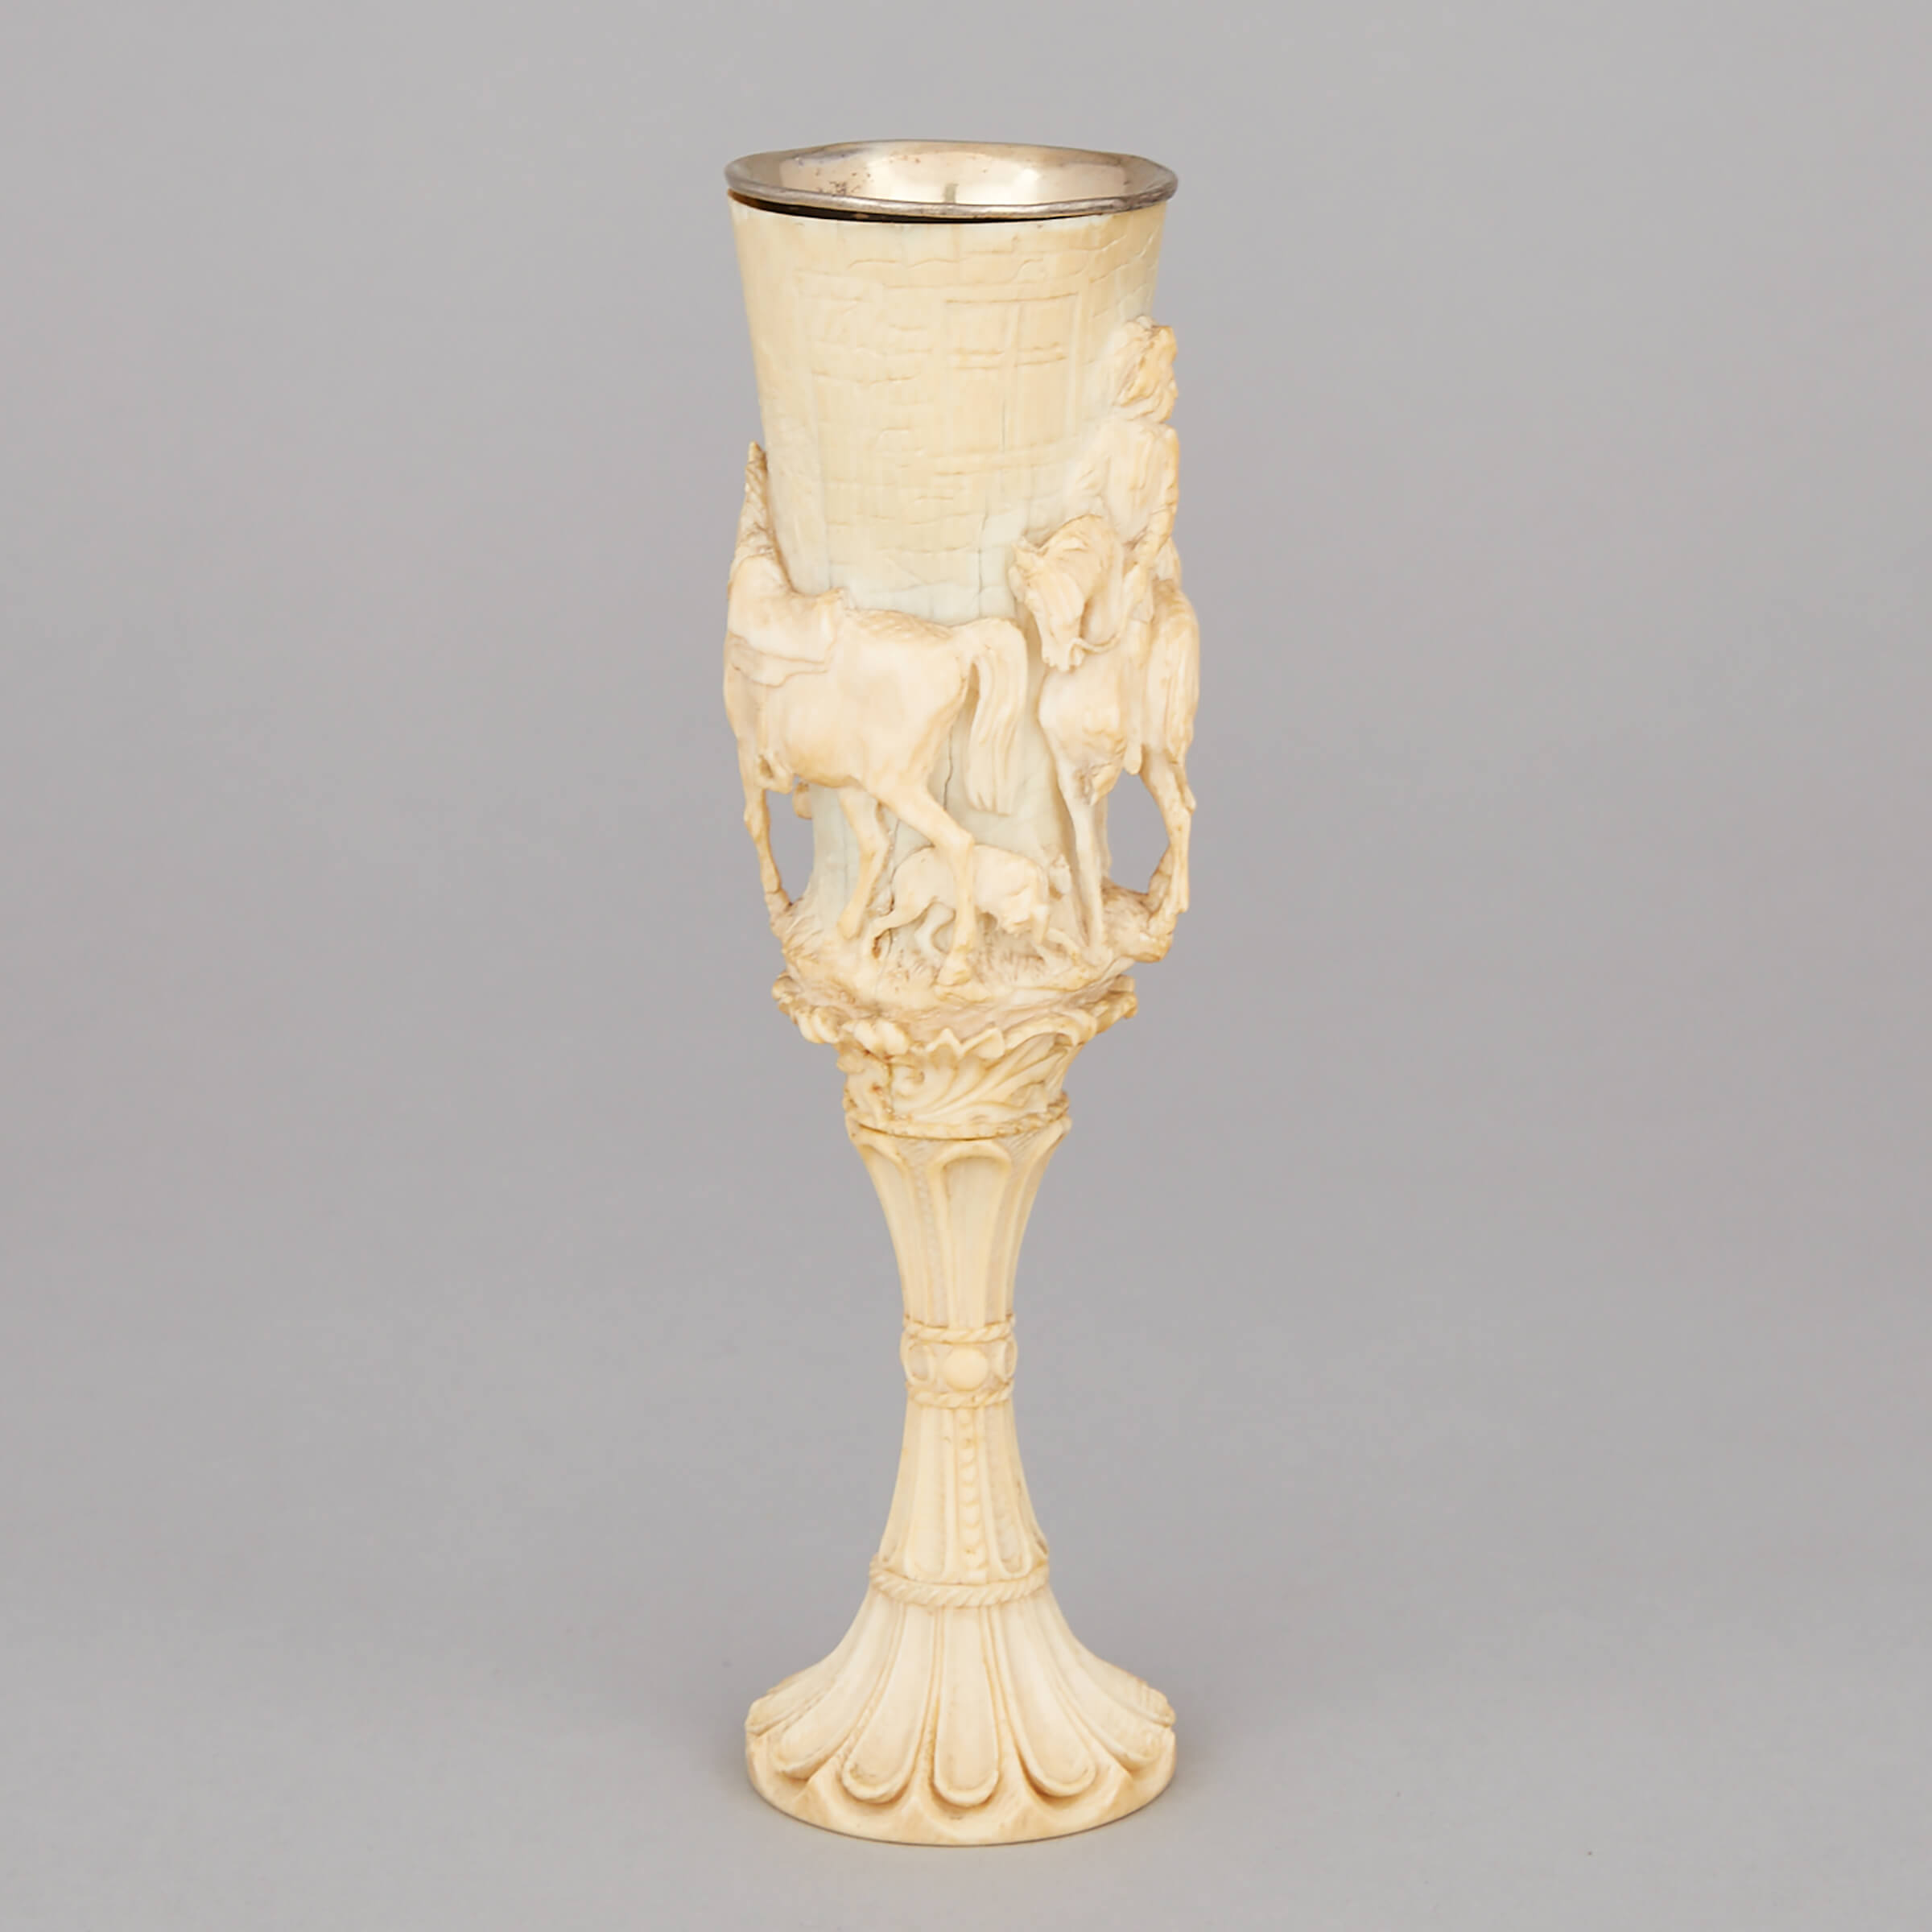 German Gothic Carved Ivory Wine Cup, mid 19th century